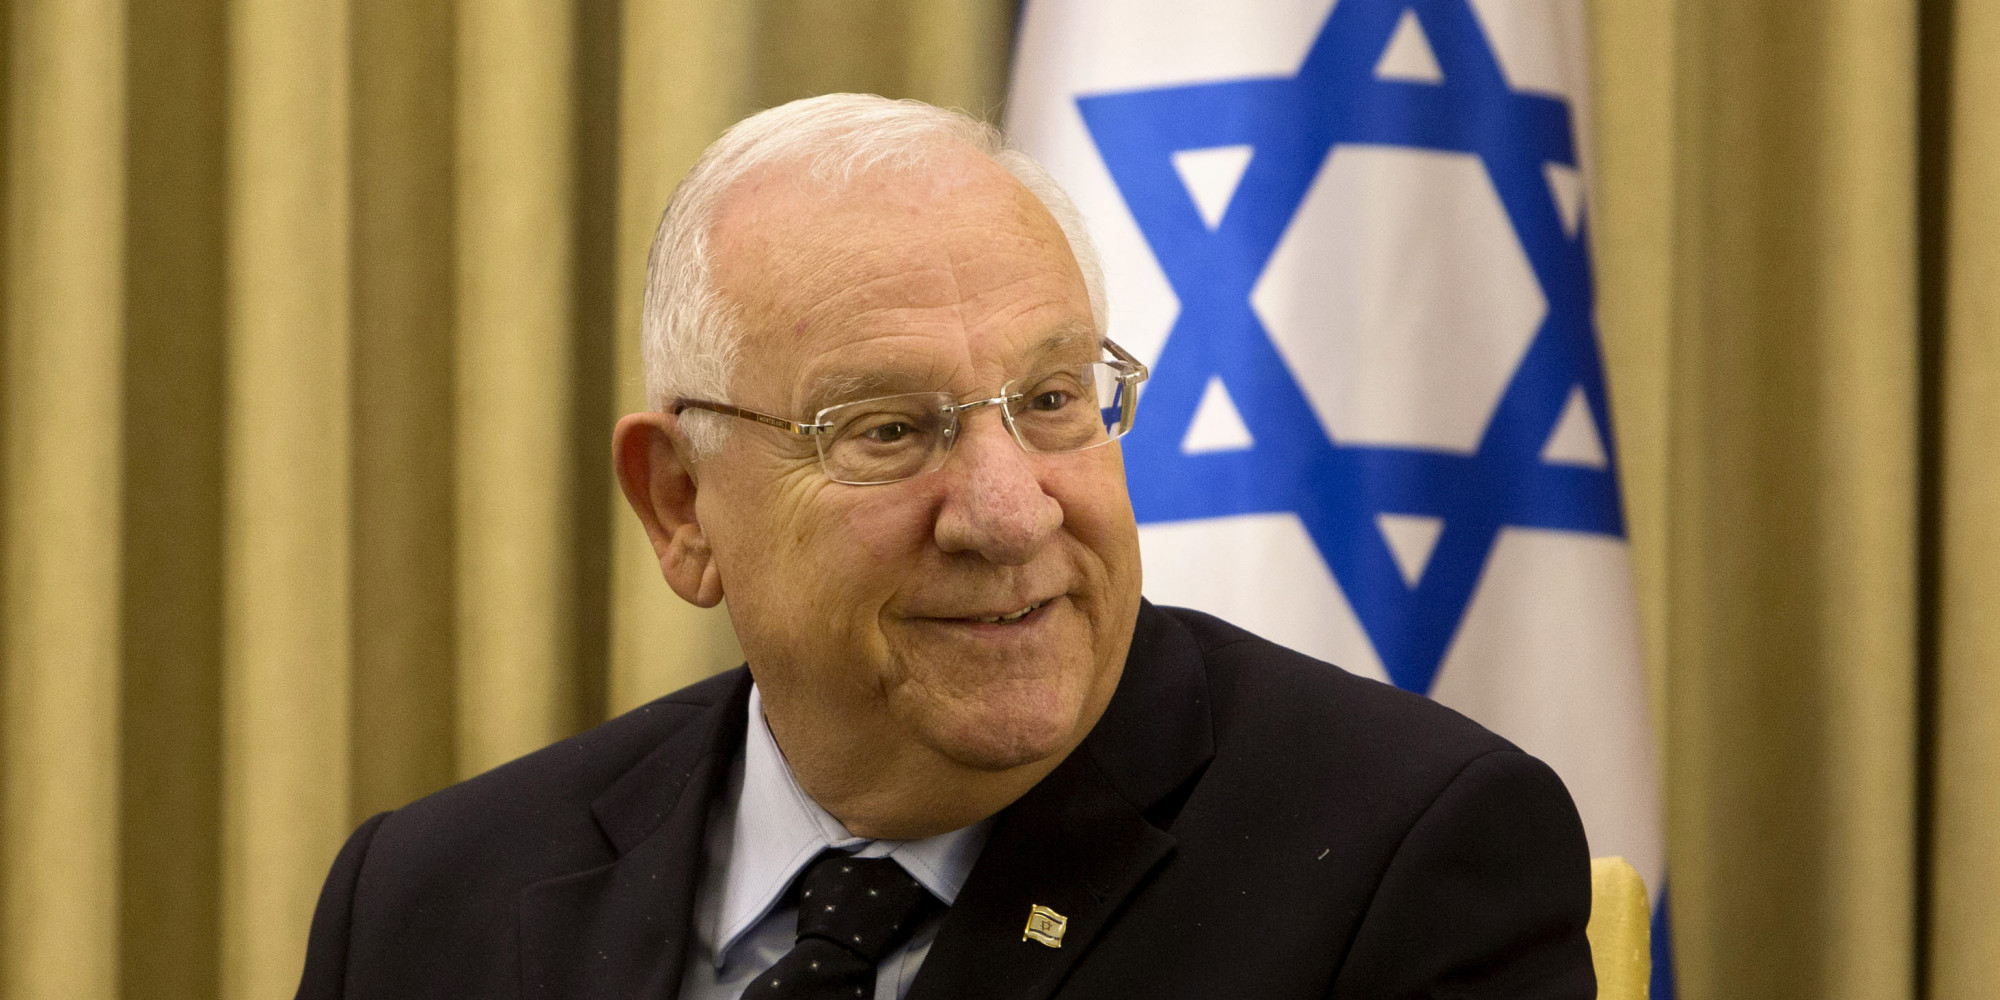 Israel President Reuven Rivlin to hold talks with PM Narendra Modi During his visit from November 14-21